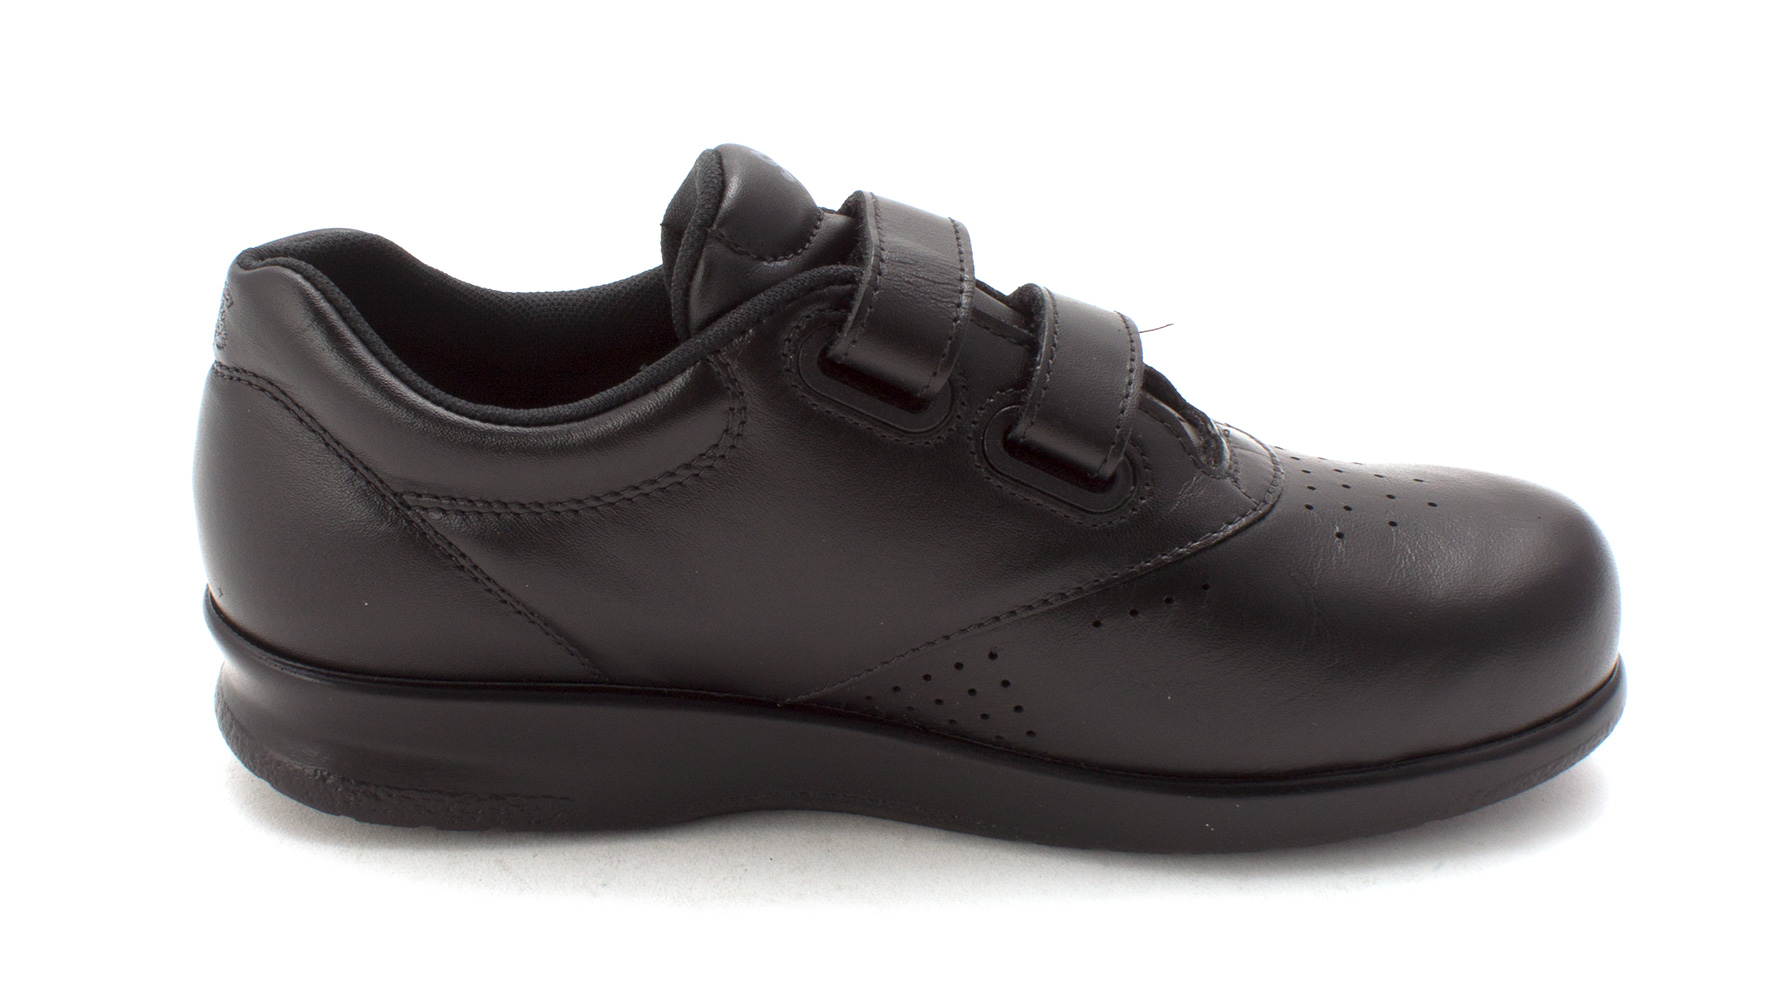 SAS Womens Me Too Leather Low Top Walking Shoes, Black, Size 7.5 awvk ...